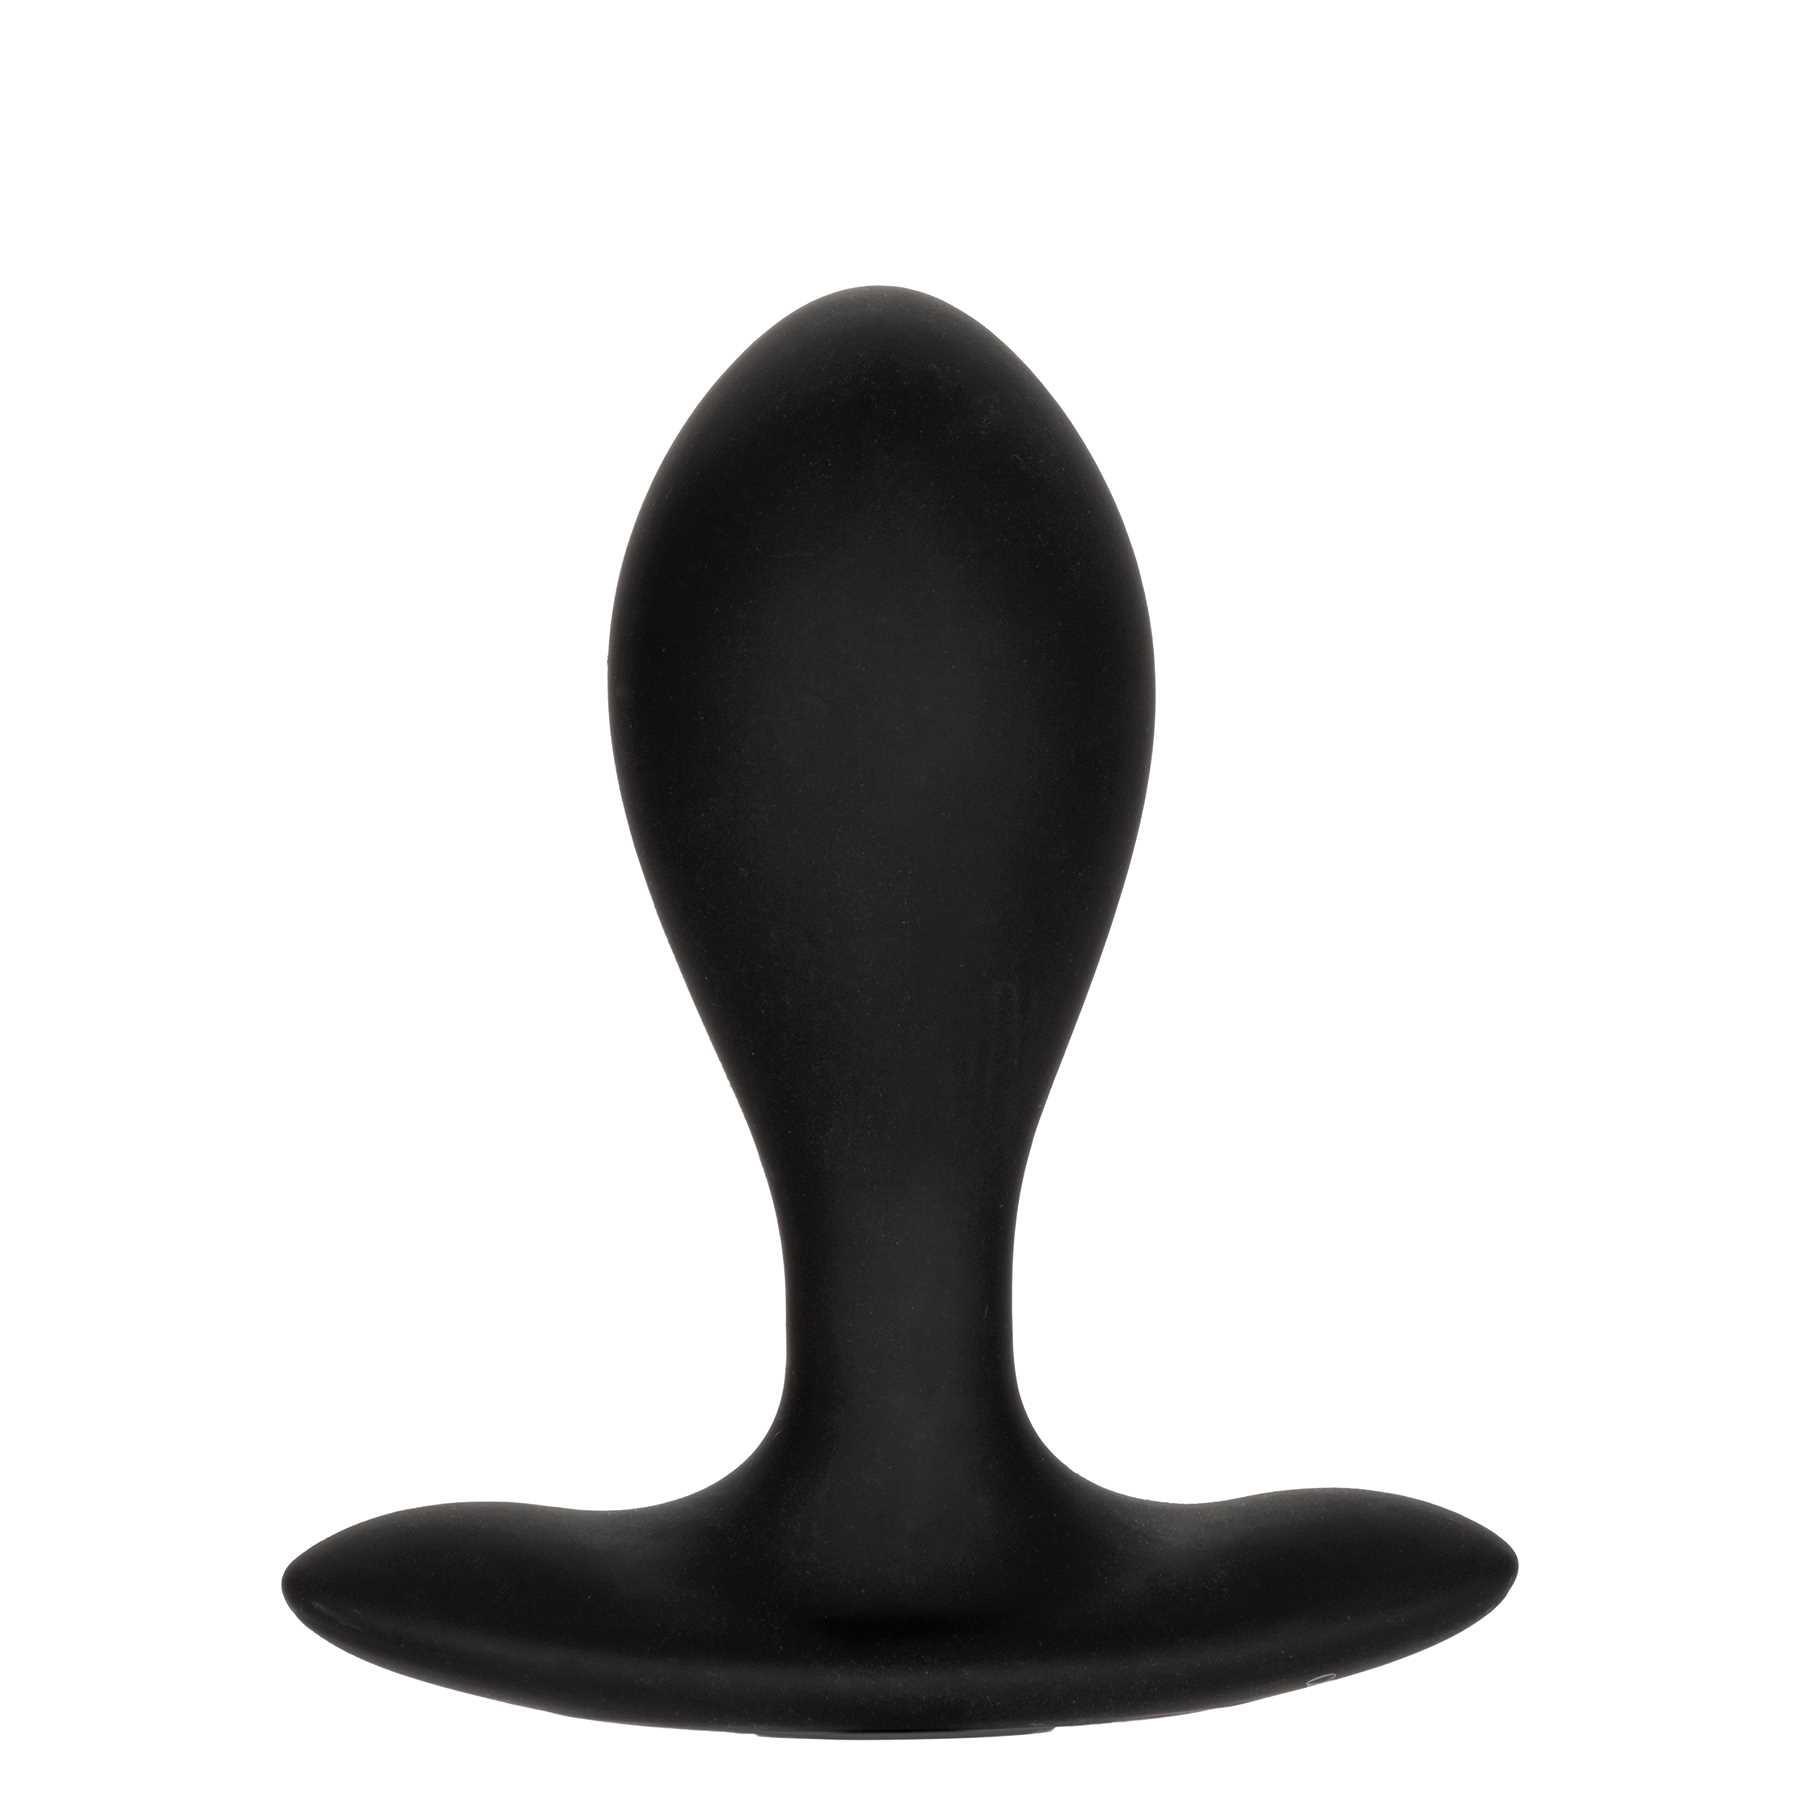 weighted silicone inflatable plug deflated